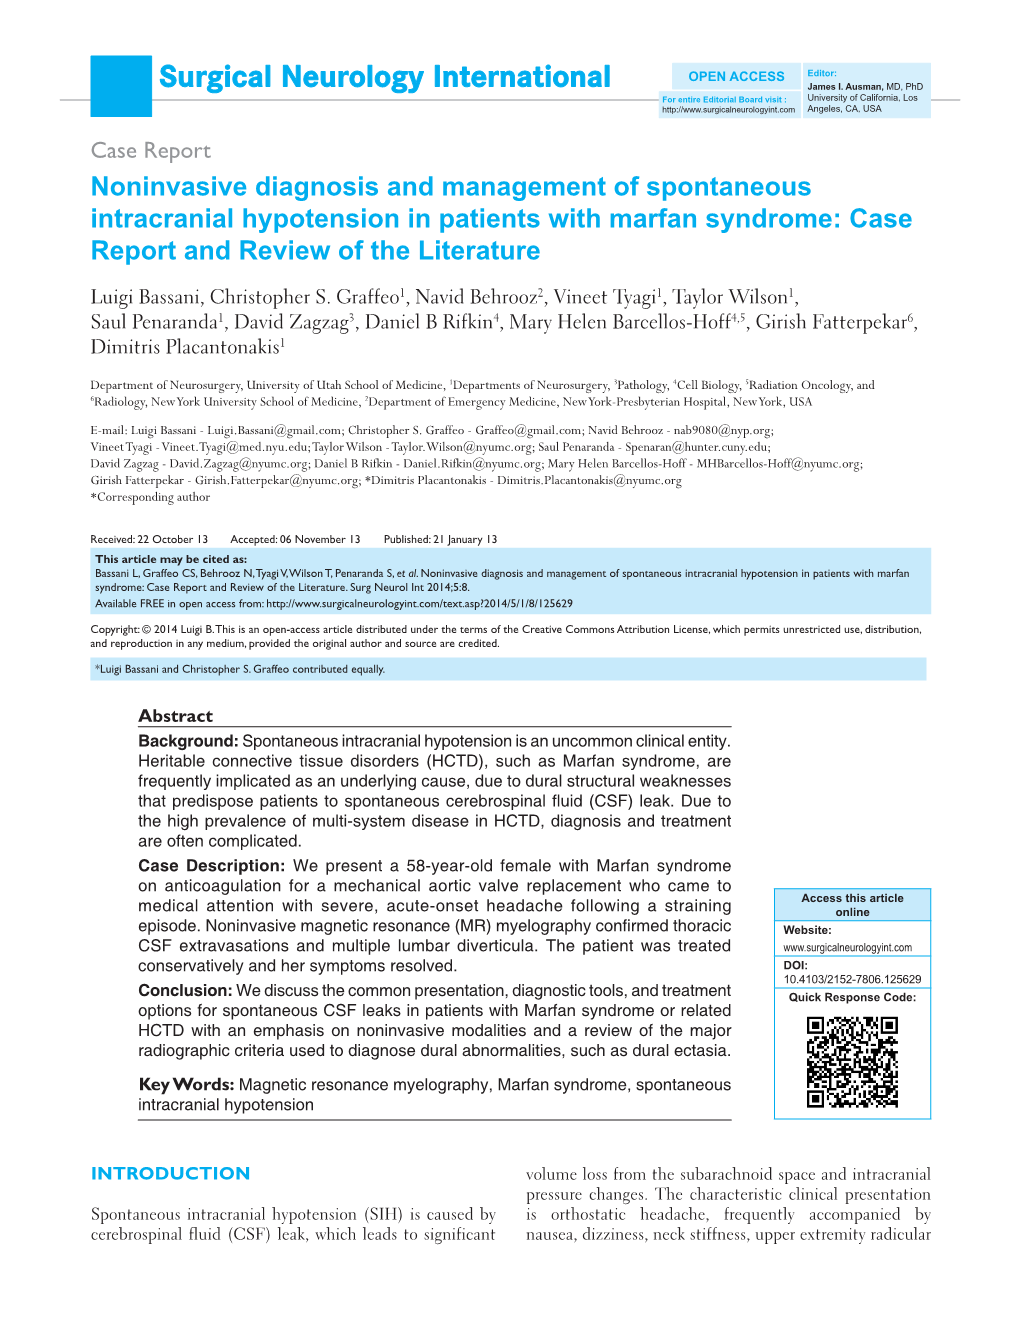 Noninvasive Diagnosis and Management of Spontaneous